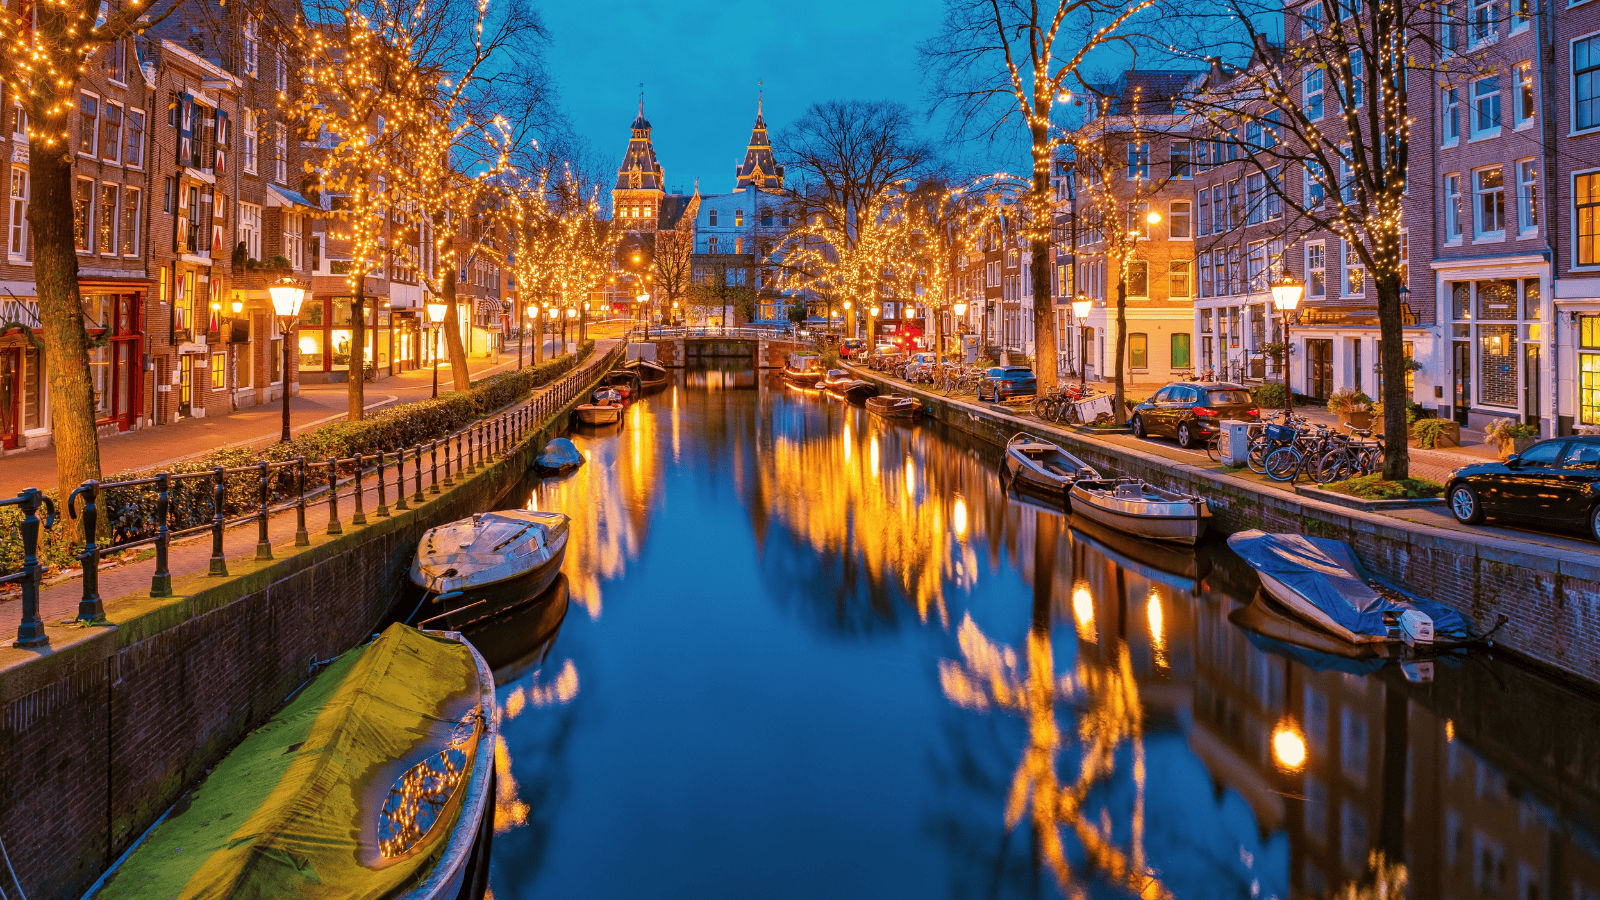 <p>Exploring Amsterdam with a disability has never been easier. Accessibility is a top priority, from step-free public transportation to museums and <a href="https://whatthefab.com/where-to-stay-in-amsterdam.html" rel="follow">places to stay</a> designed to accommodate everyone.</p><p>Enjoy Amsterdam like a local by cruising down the canal on boats with wheelchair lifts. Some companies even have adaptive bikes for disabled visitors to cycle the city’s expansive biking trails.</p>